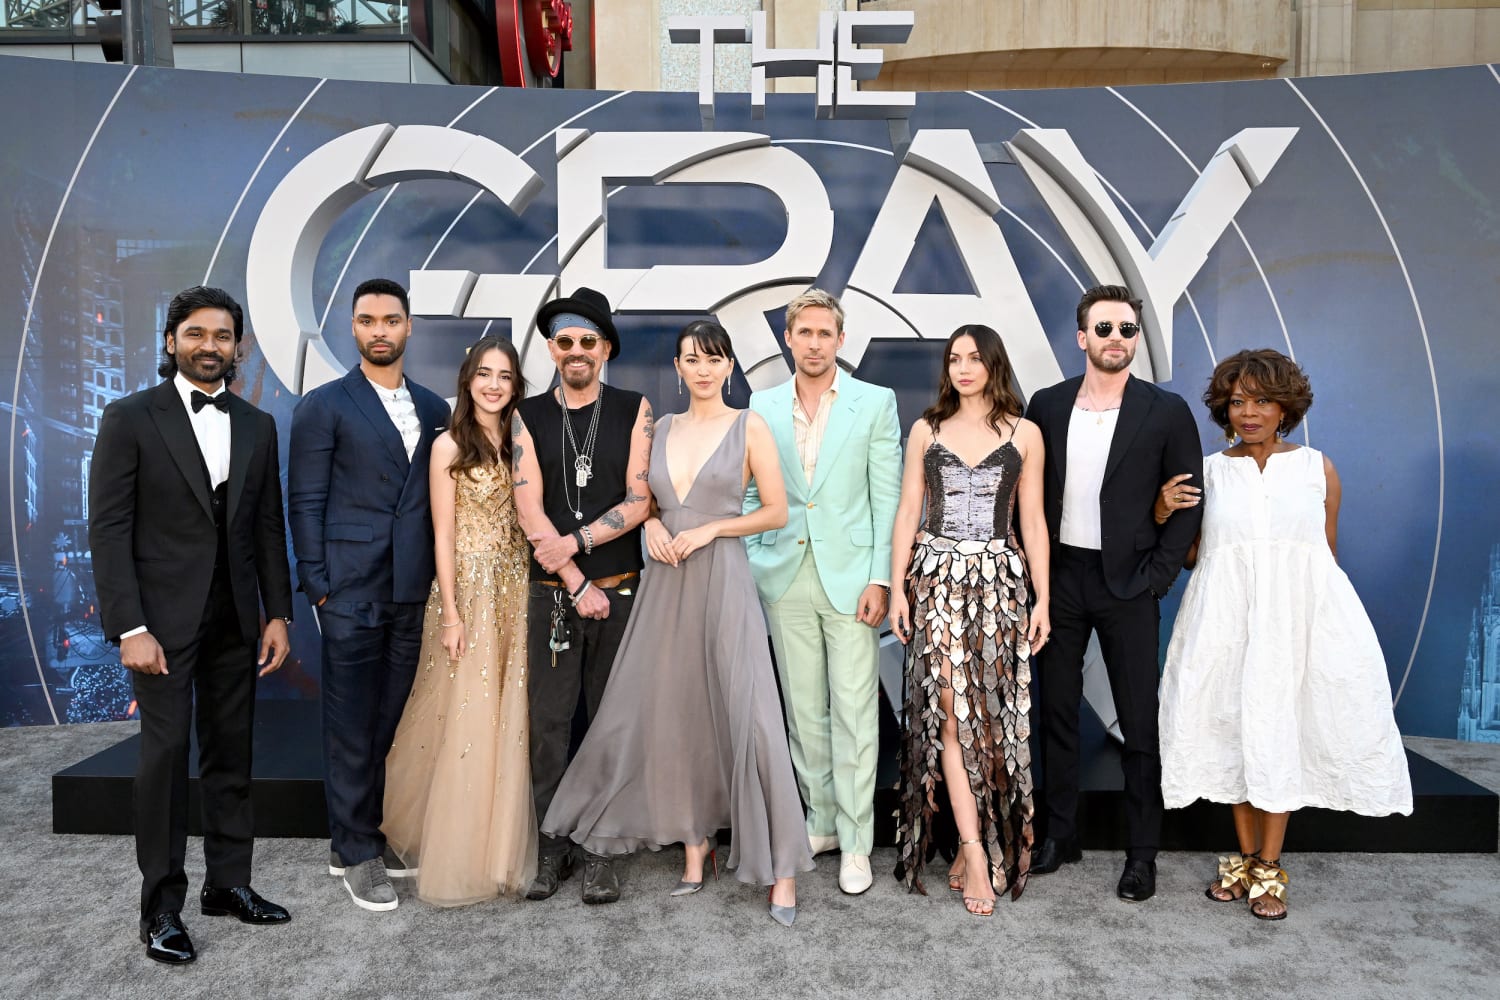 The Gray Man' Cast: Every Star in the Netflix Movie and Their Characters